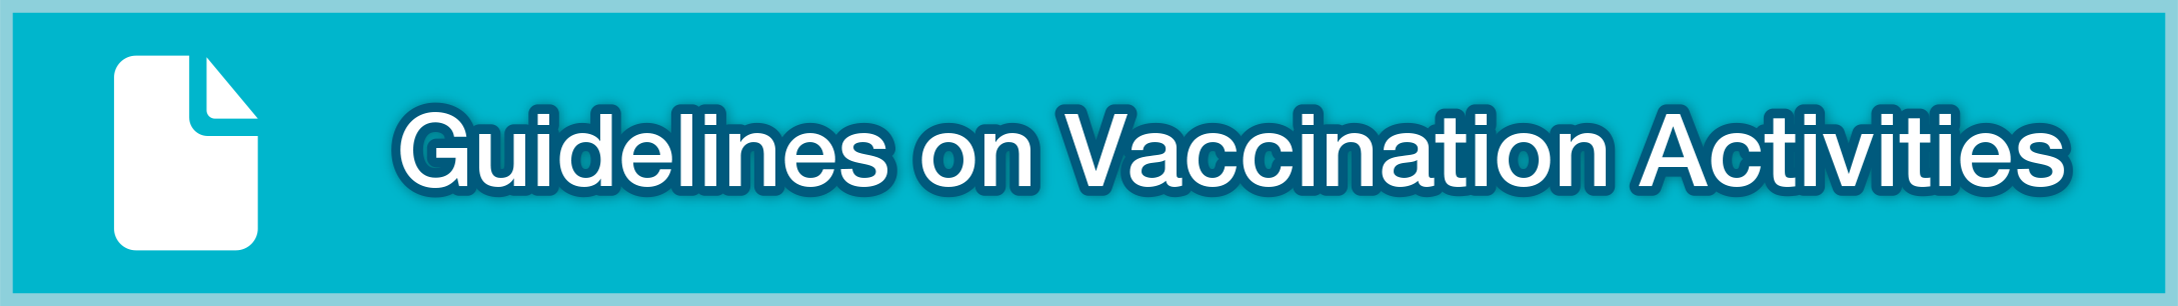 Guidelines on Vaccination Activities